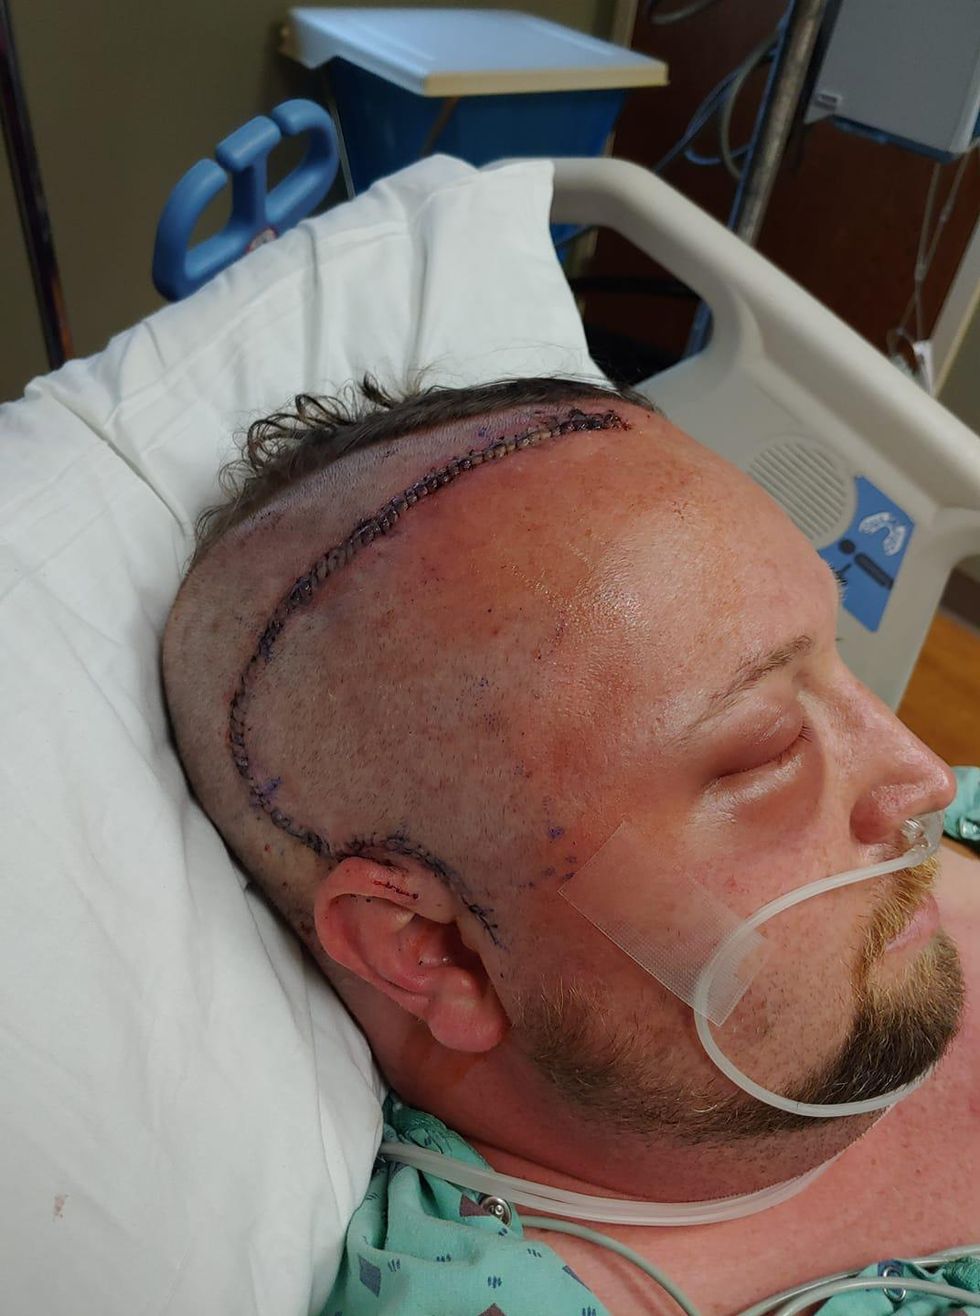 Christopher Spalding lies in a hospital bed following brain surgery. The right side of his head is shaved and is sewn from the middle of his forward to his right ear.